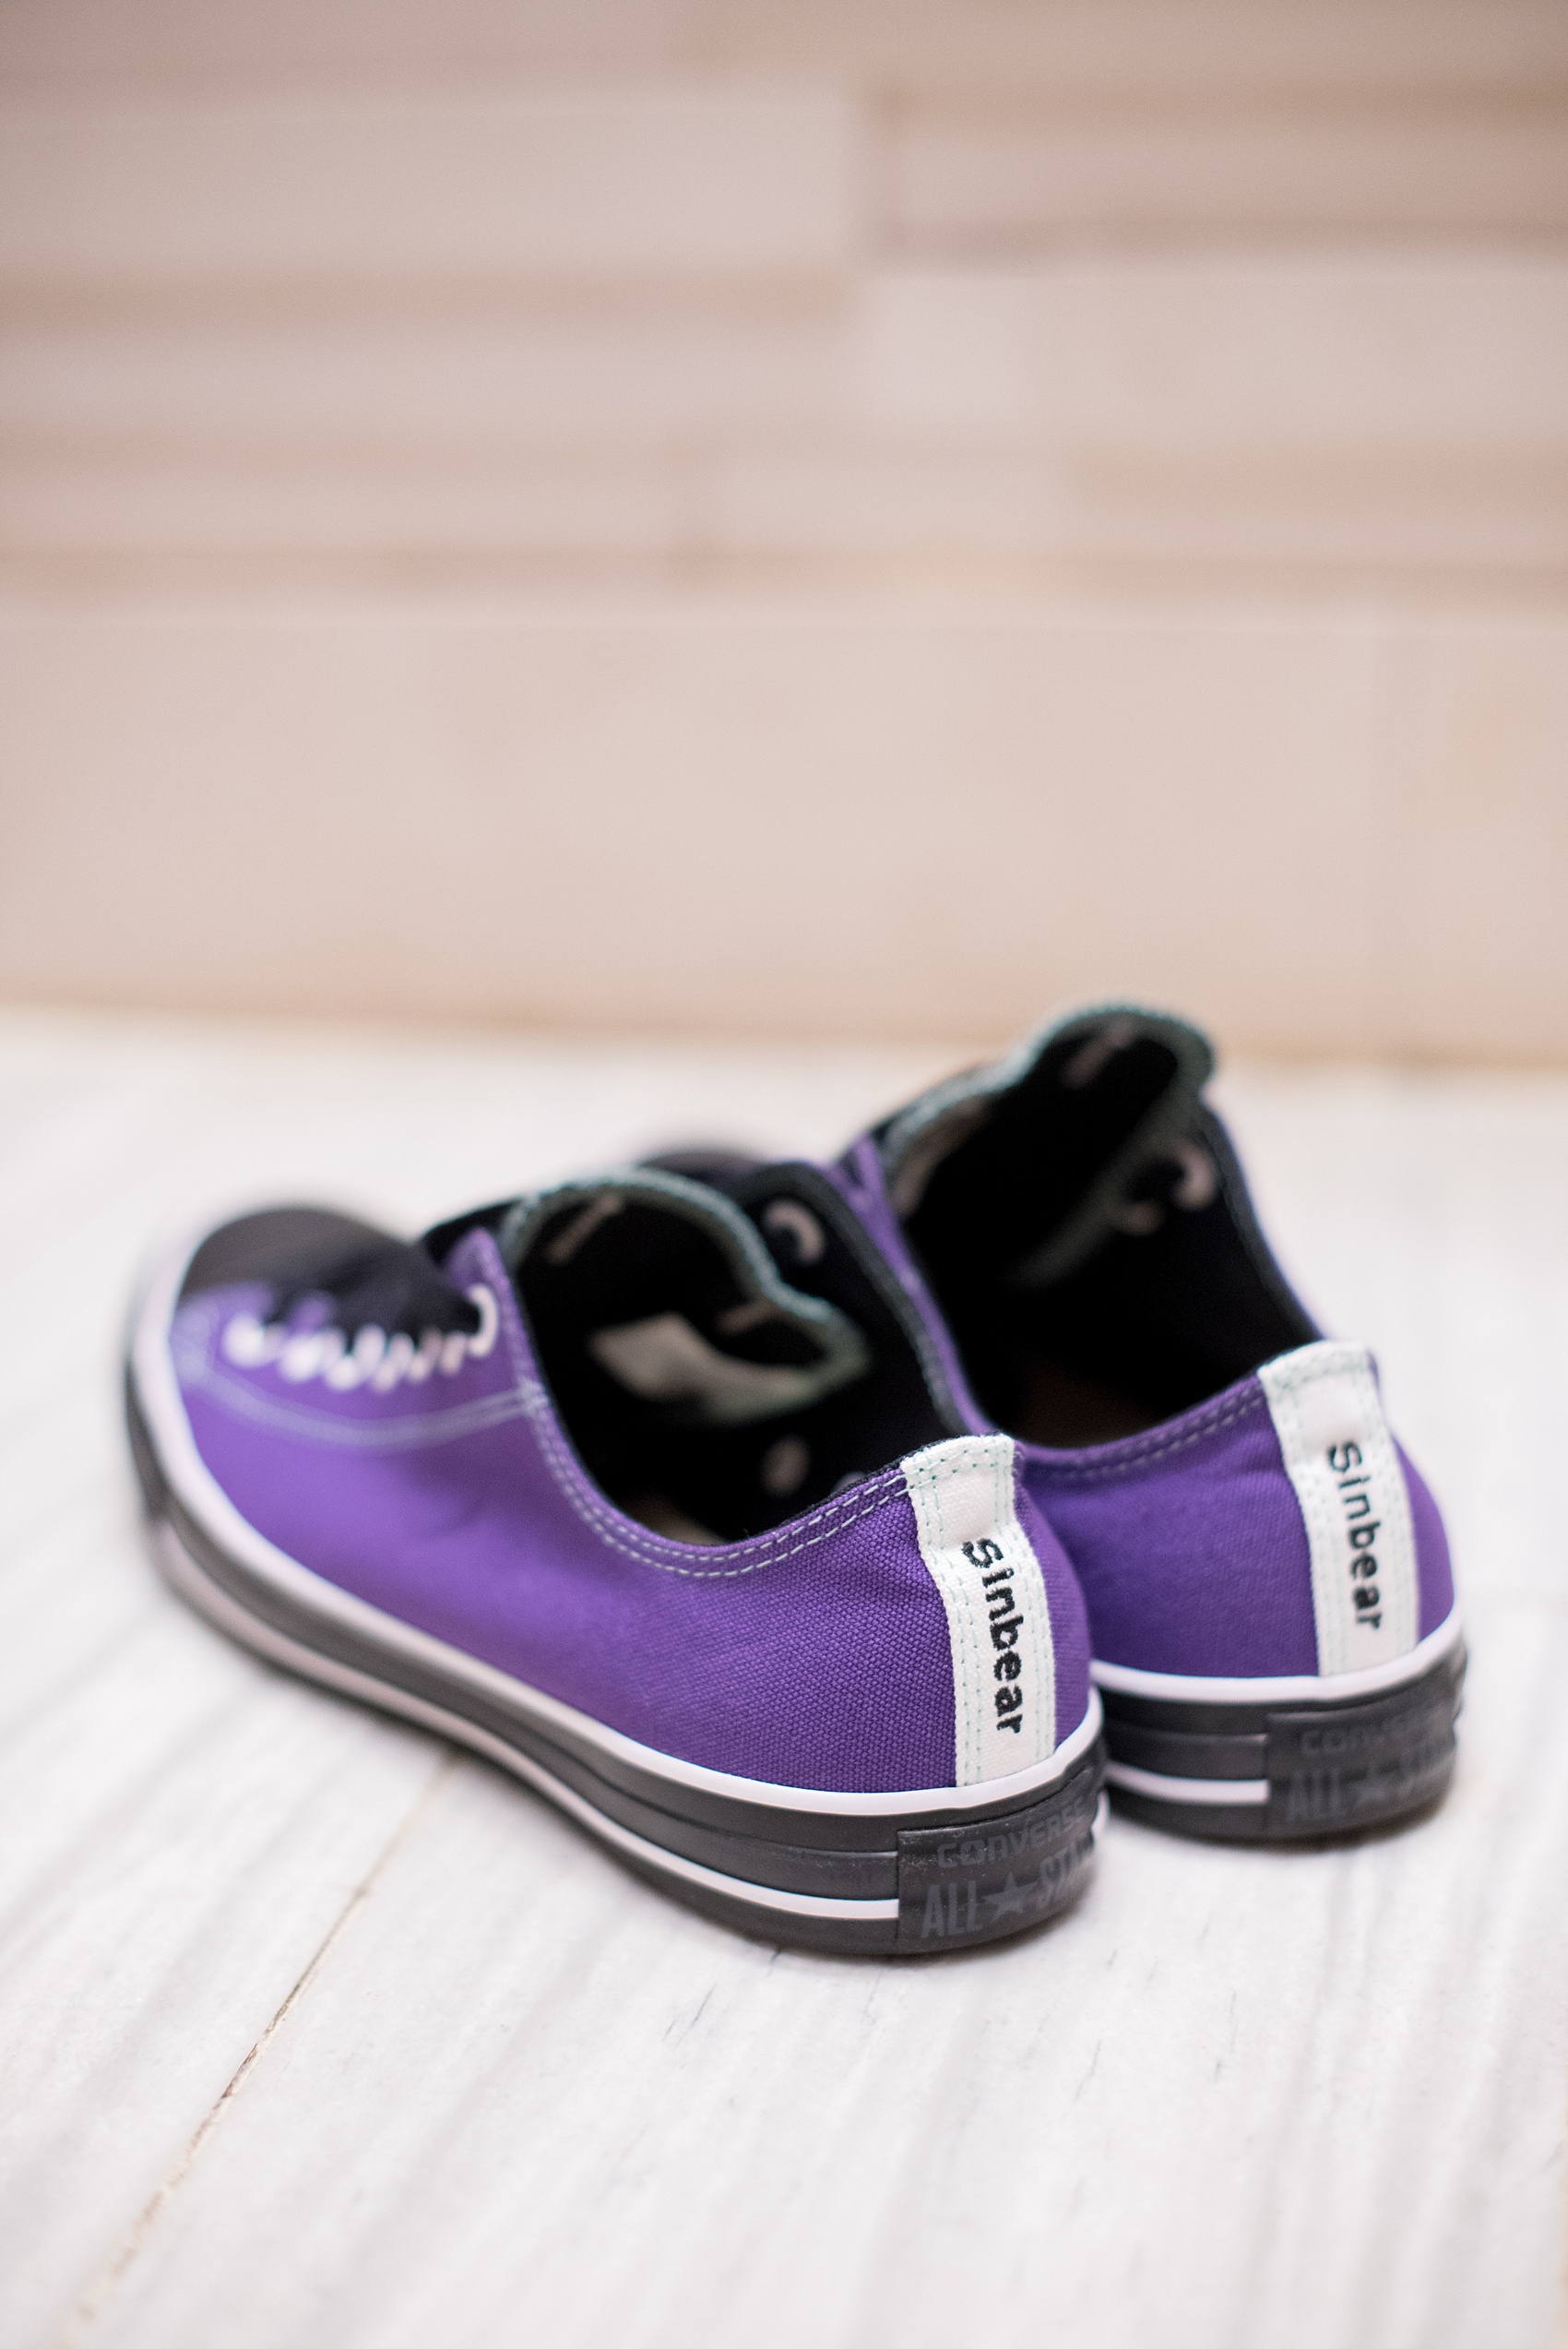 Mikkel Paige Photography photos of a NYC wedding at Tribeca Rooftop. Custom purple Converse for the groom!